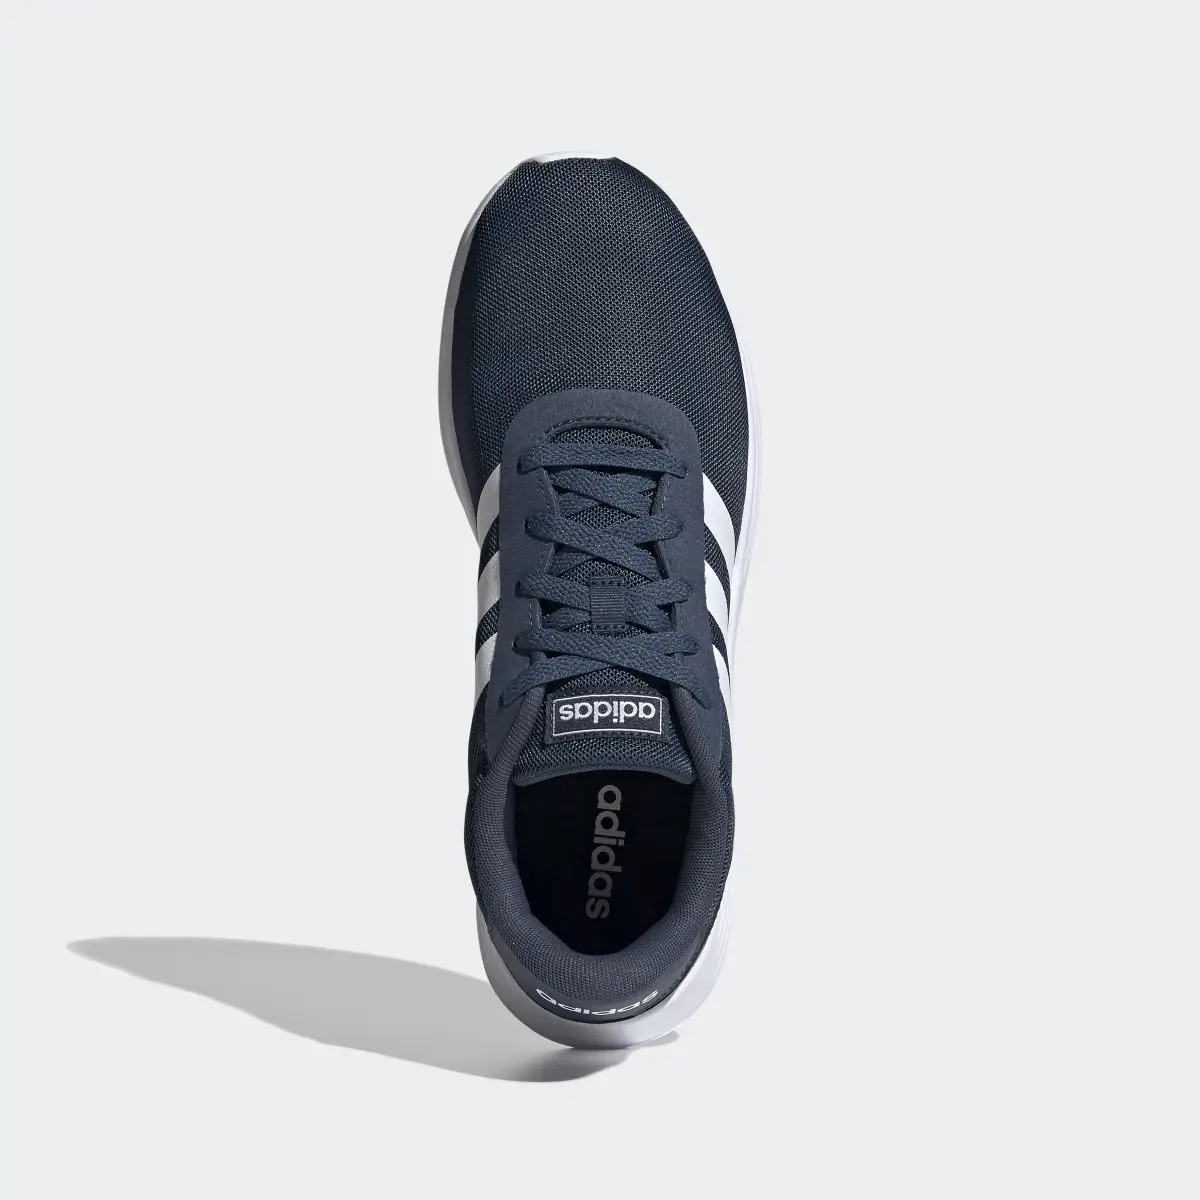 Adidas Lite Racer 2.0 Shoes. 3